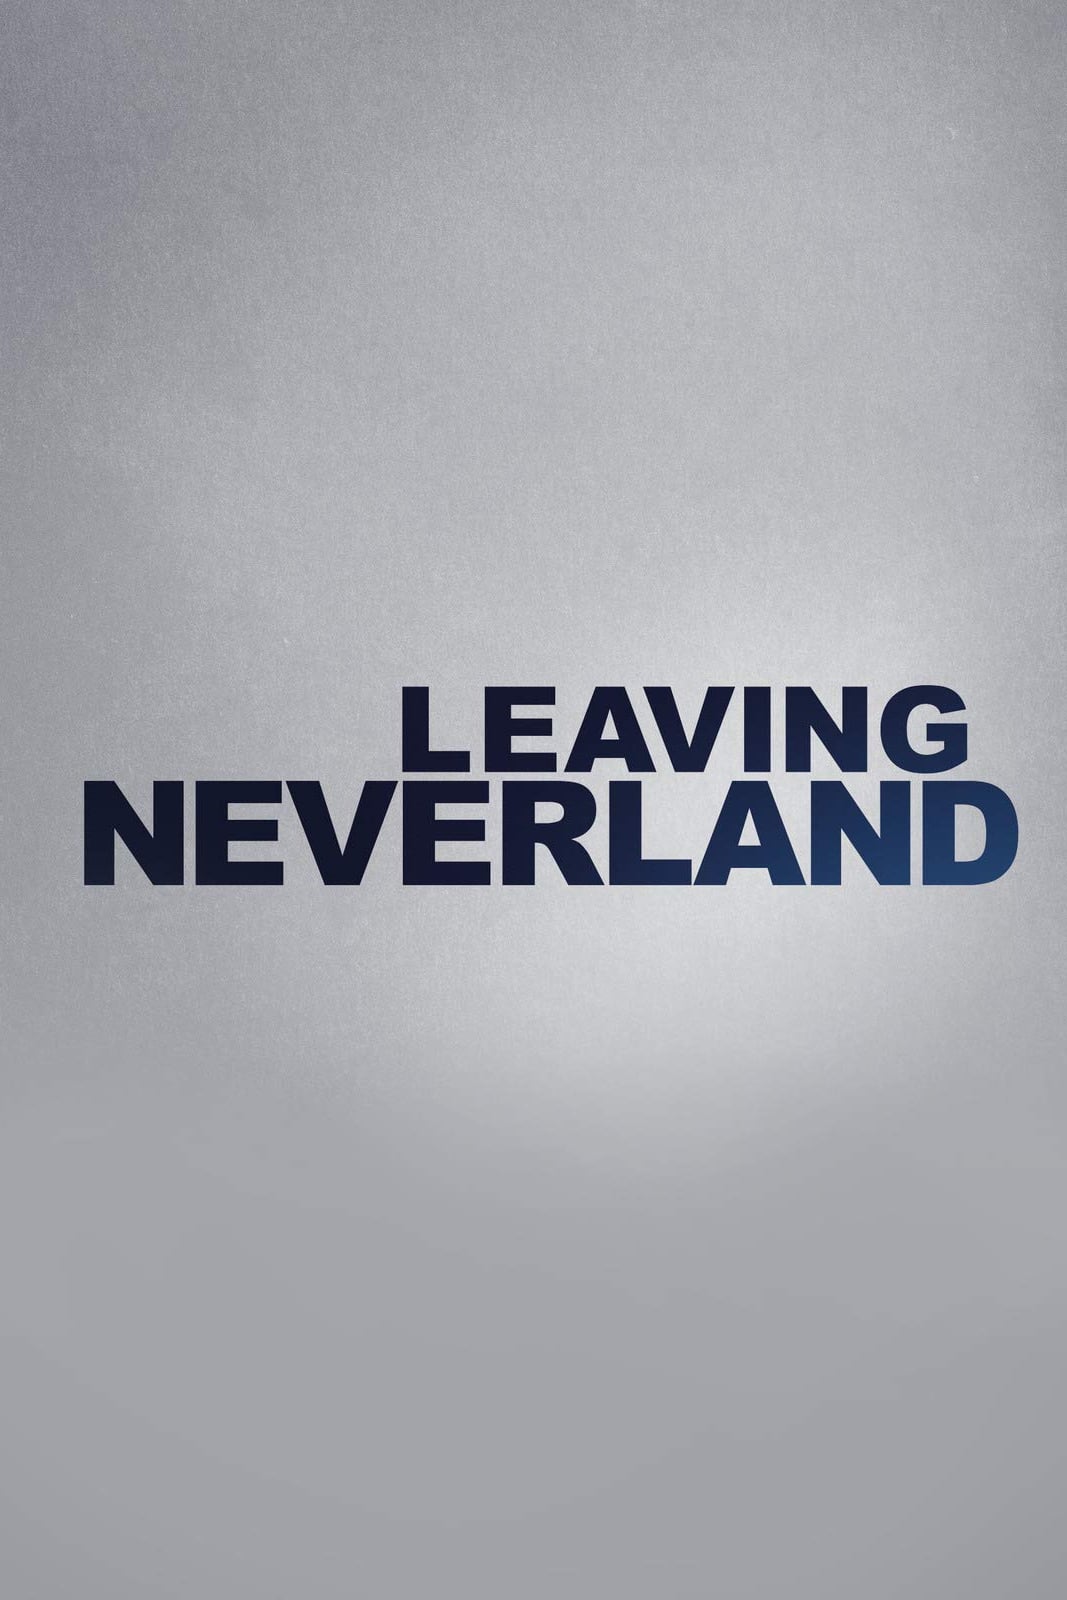 Leaving Neverland TV Shows About Sexual Abuse